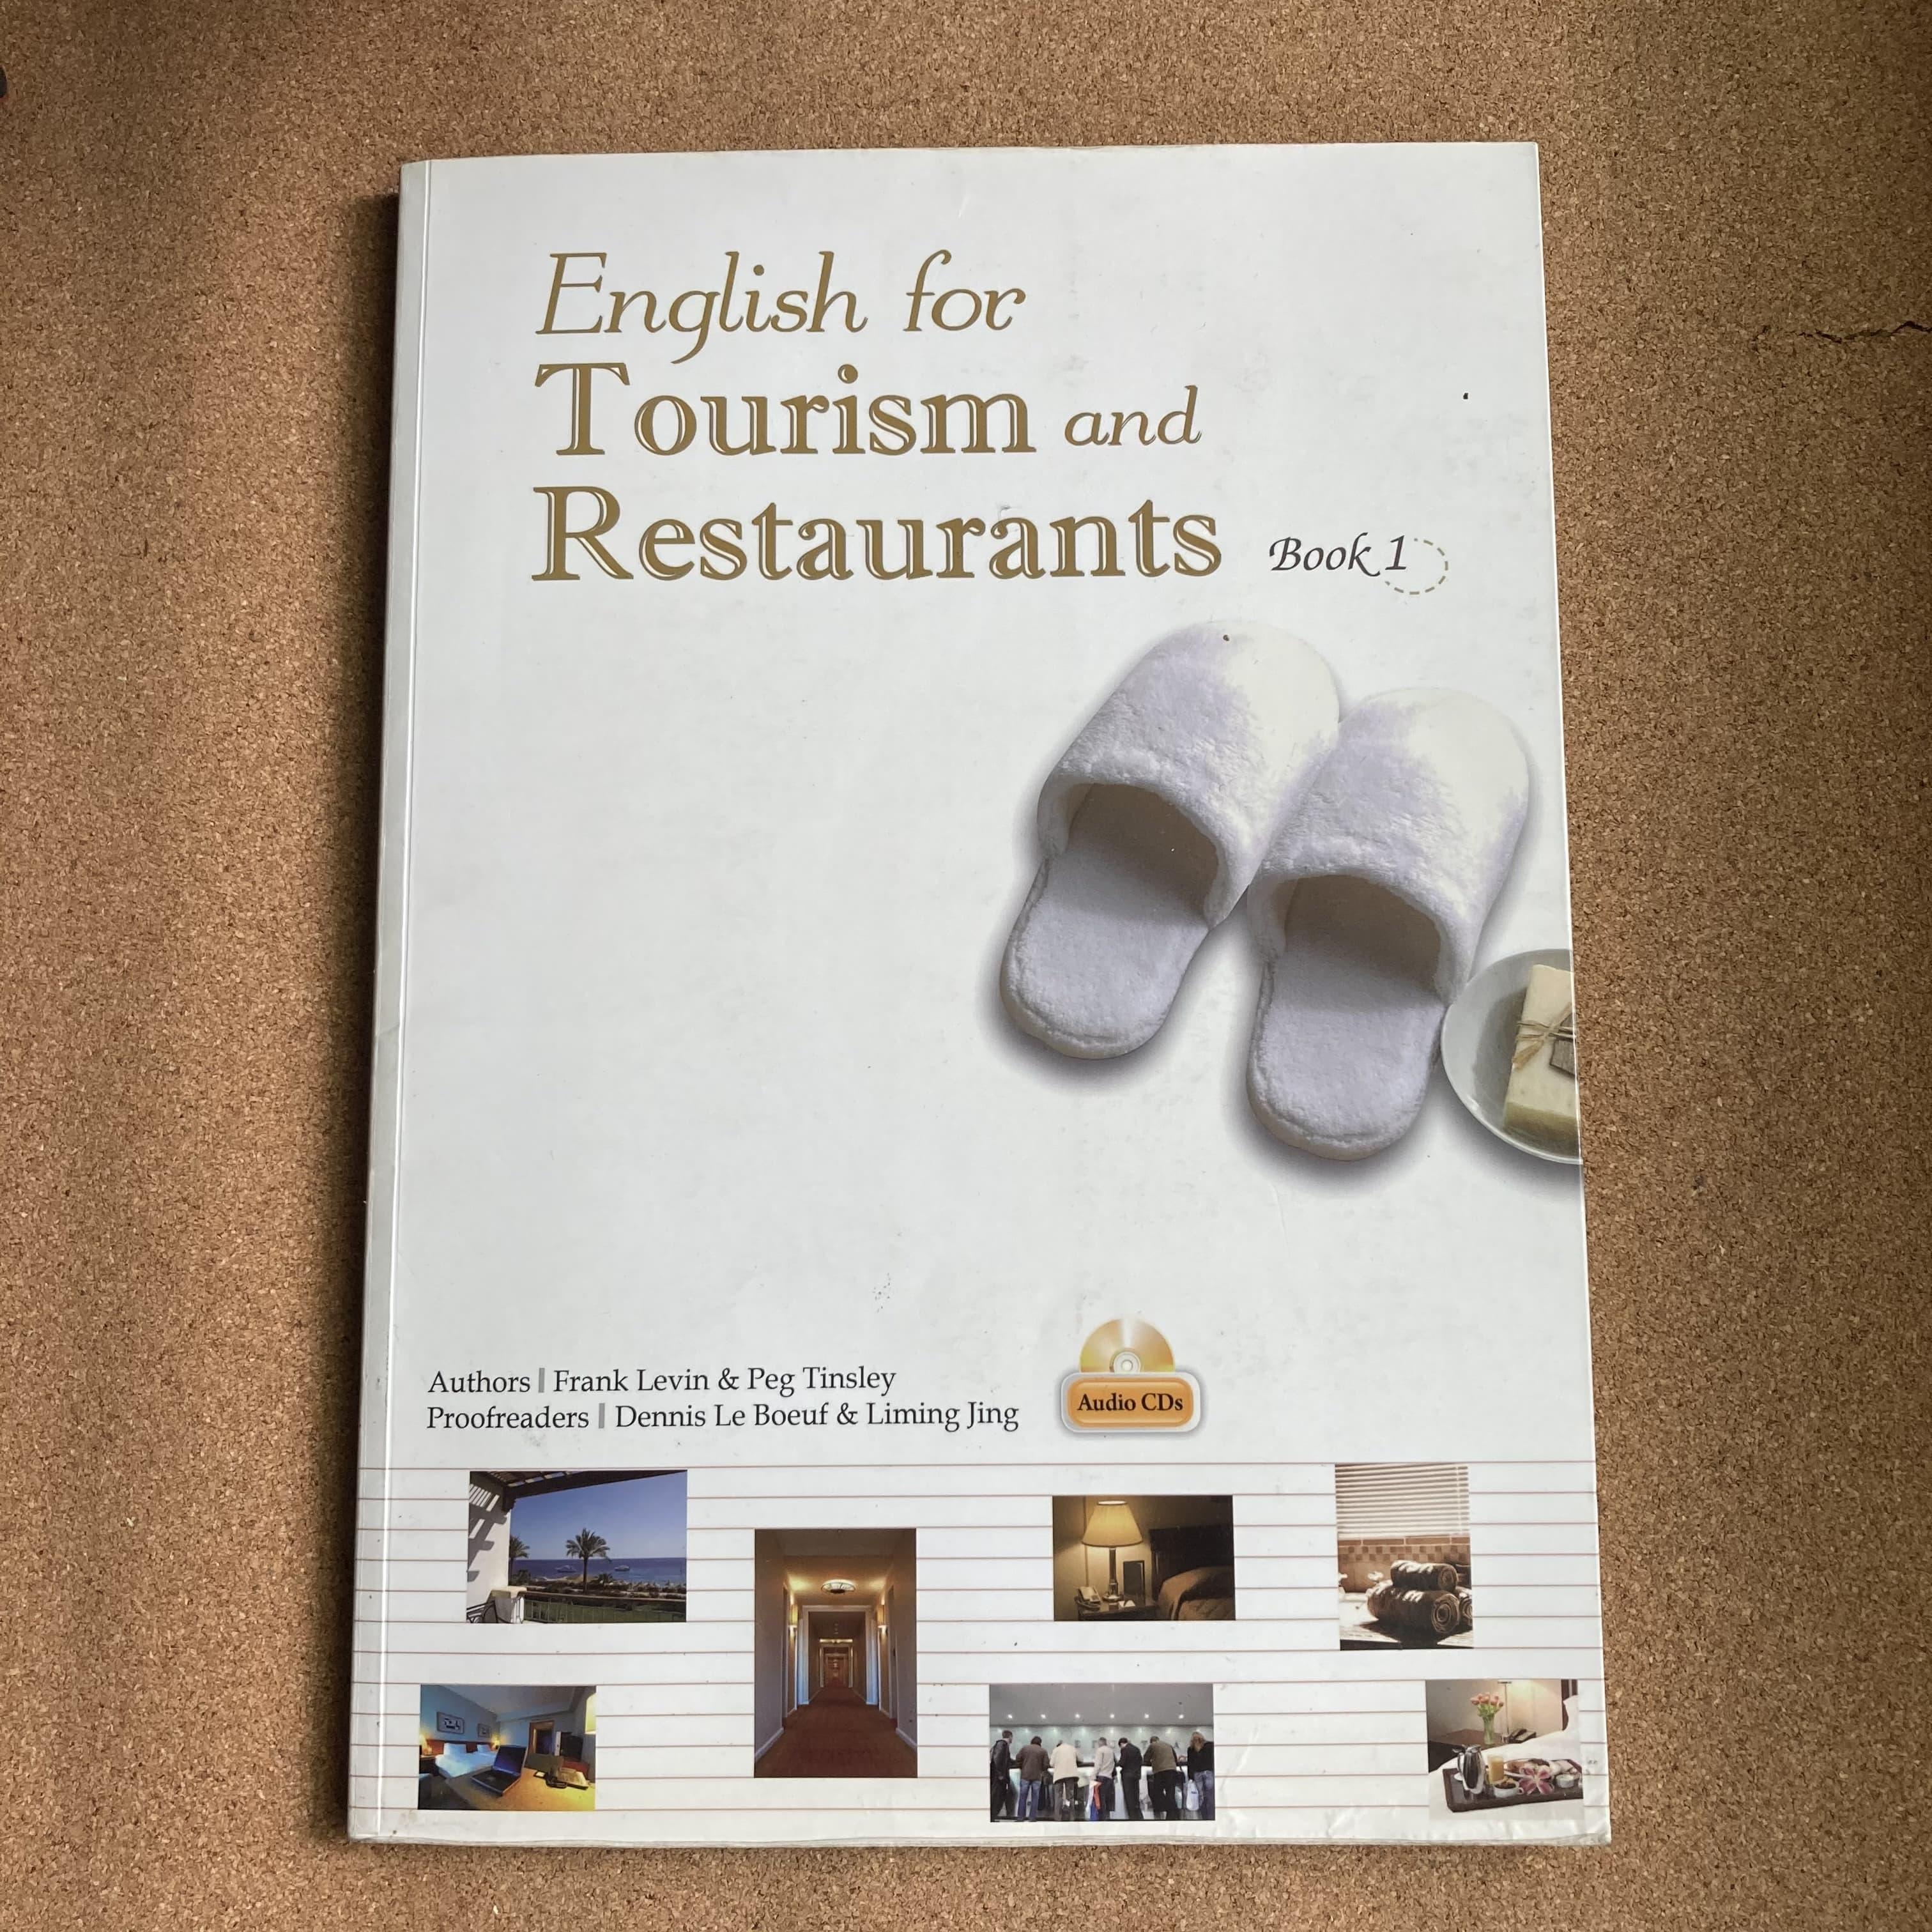 English for Tourism and Restaurants  詳細資料